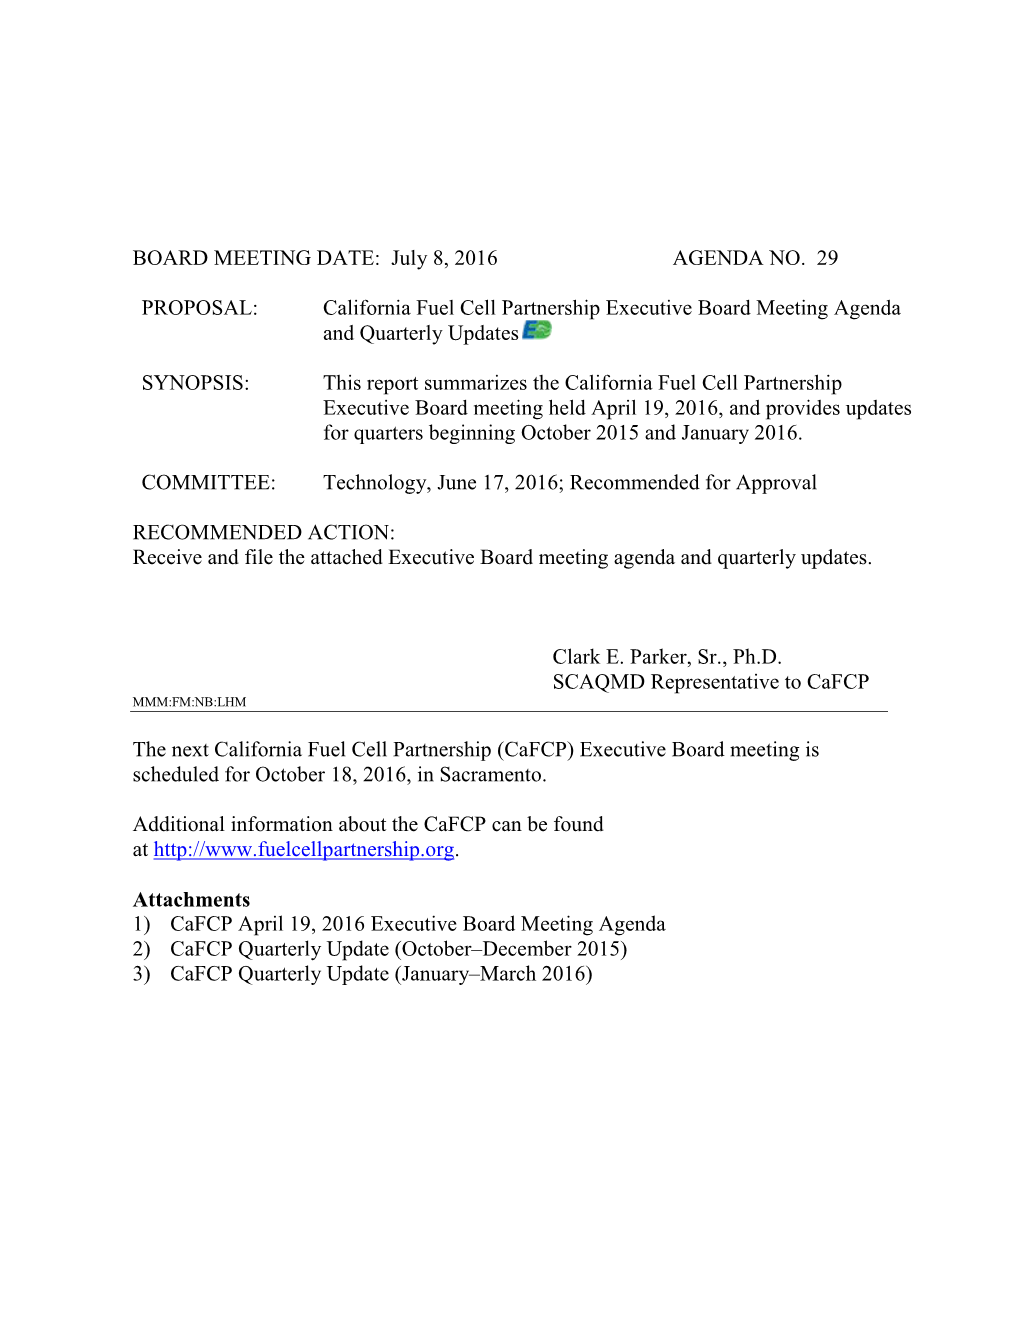 California Fuel Cell Partnership Executive Board Meeting Agenda and Quarterly Updates